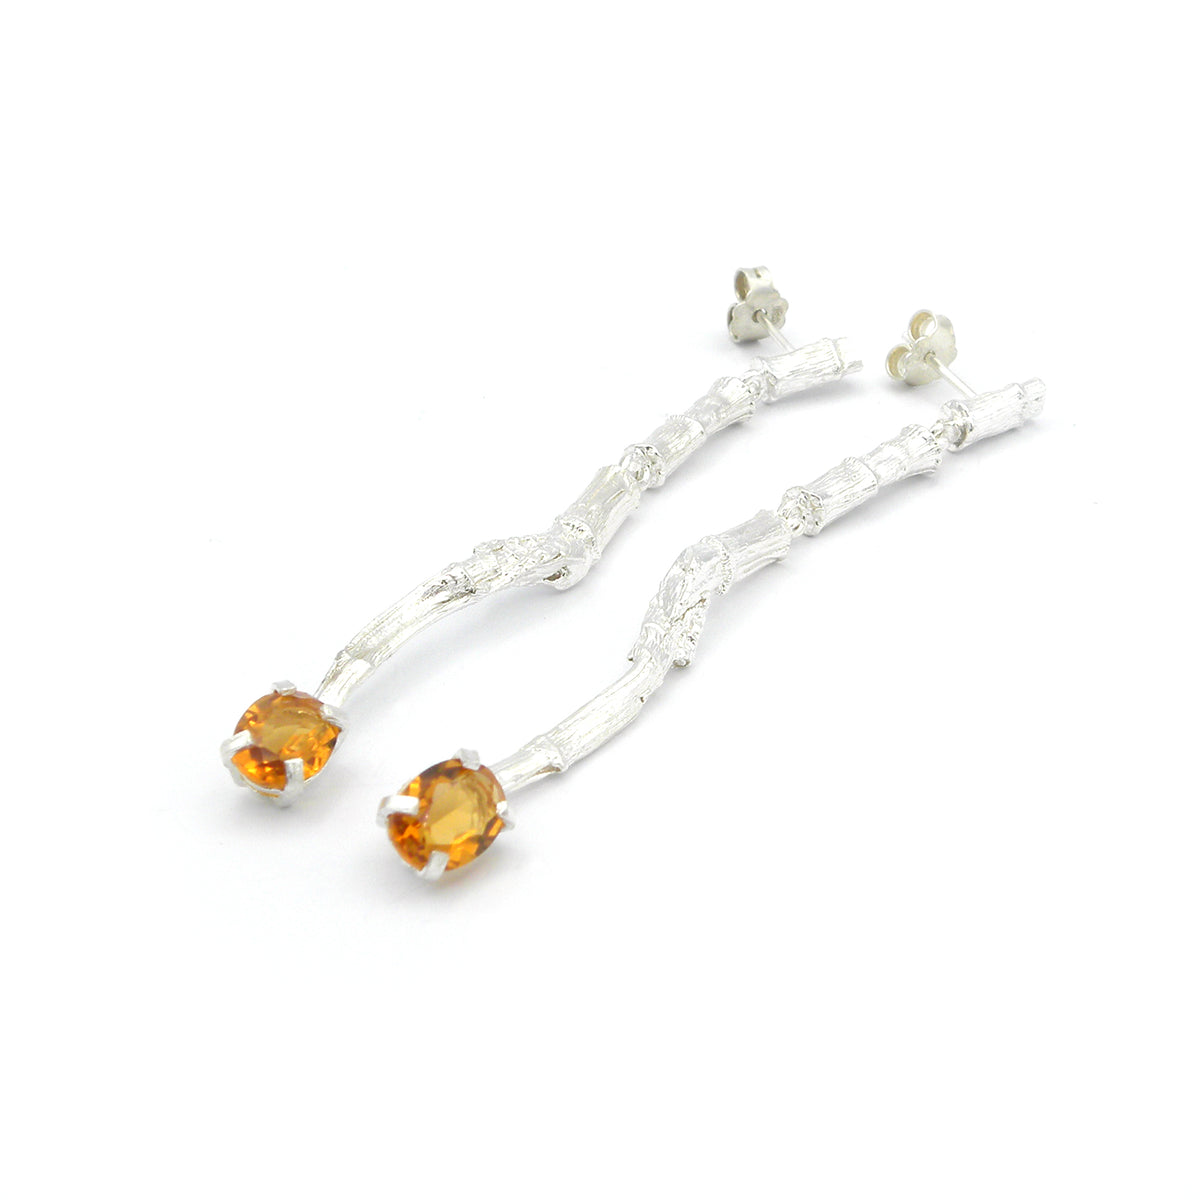 Branch and yellow quartz earrings